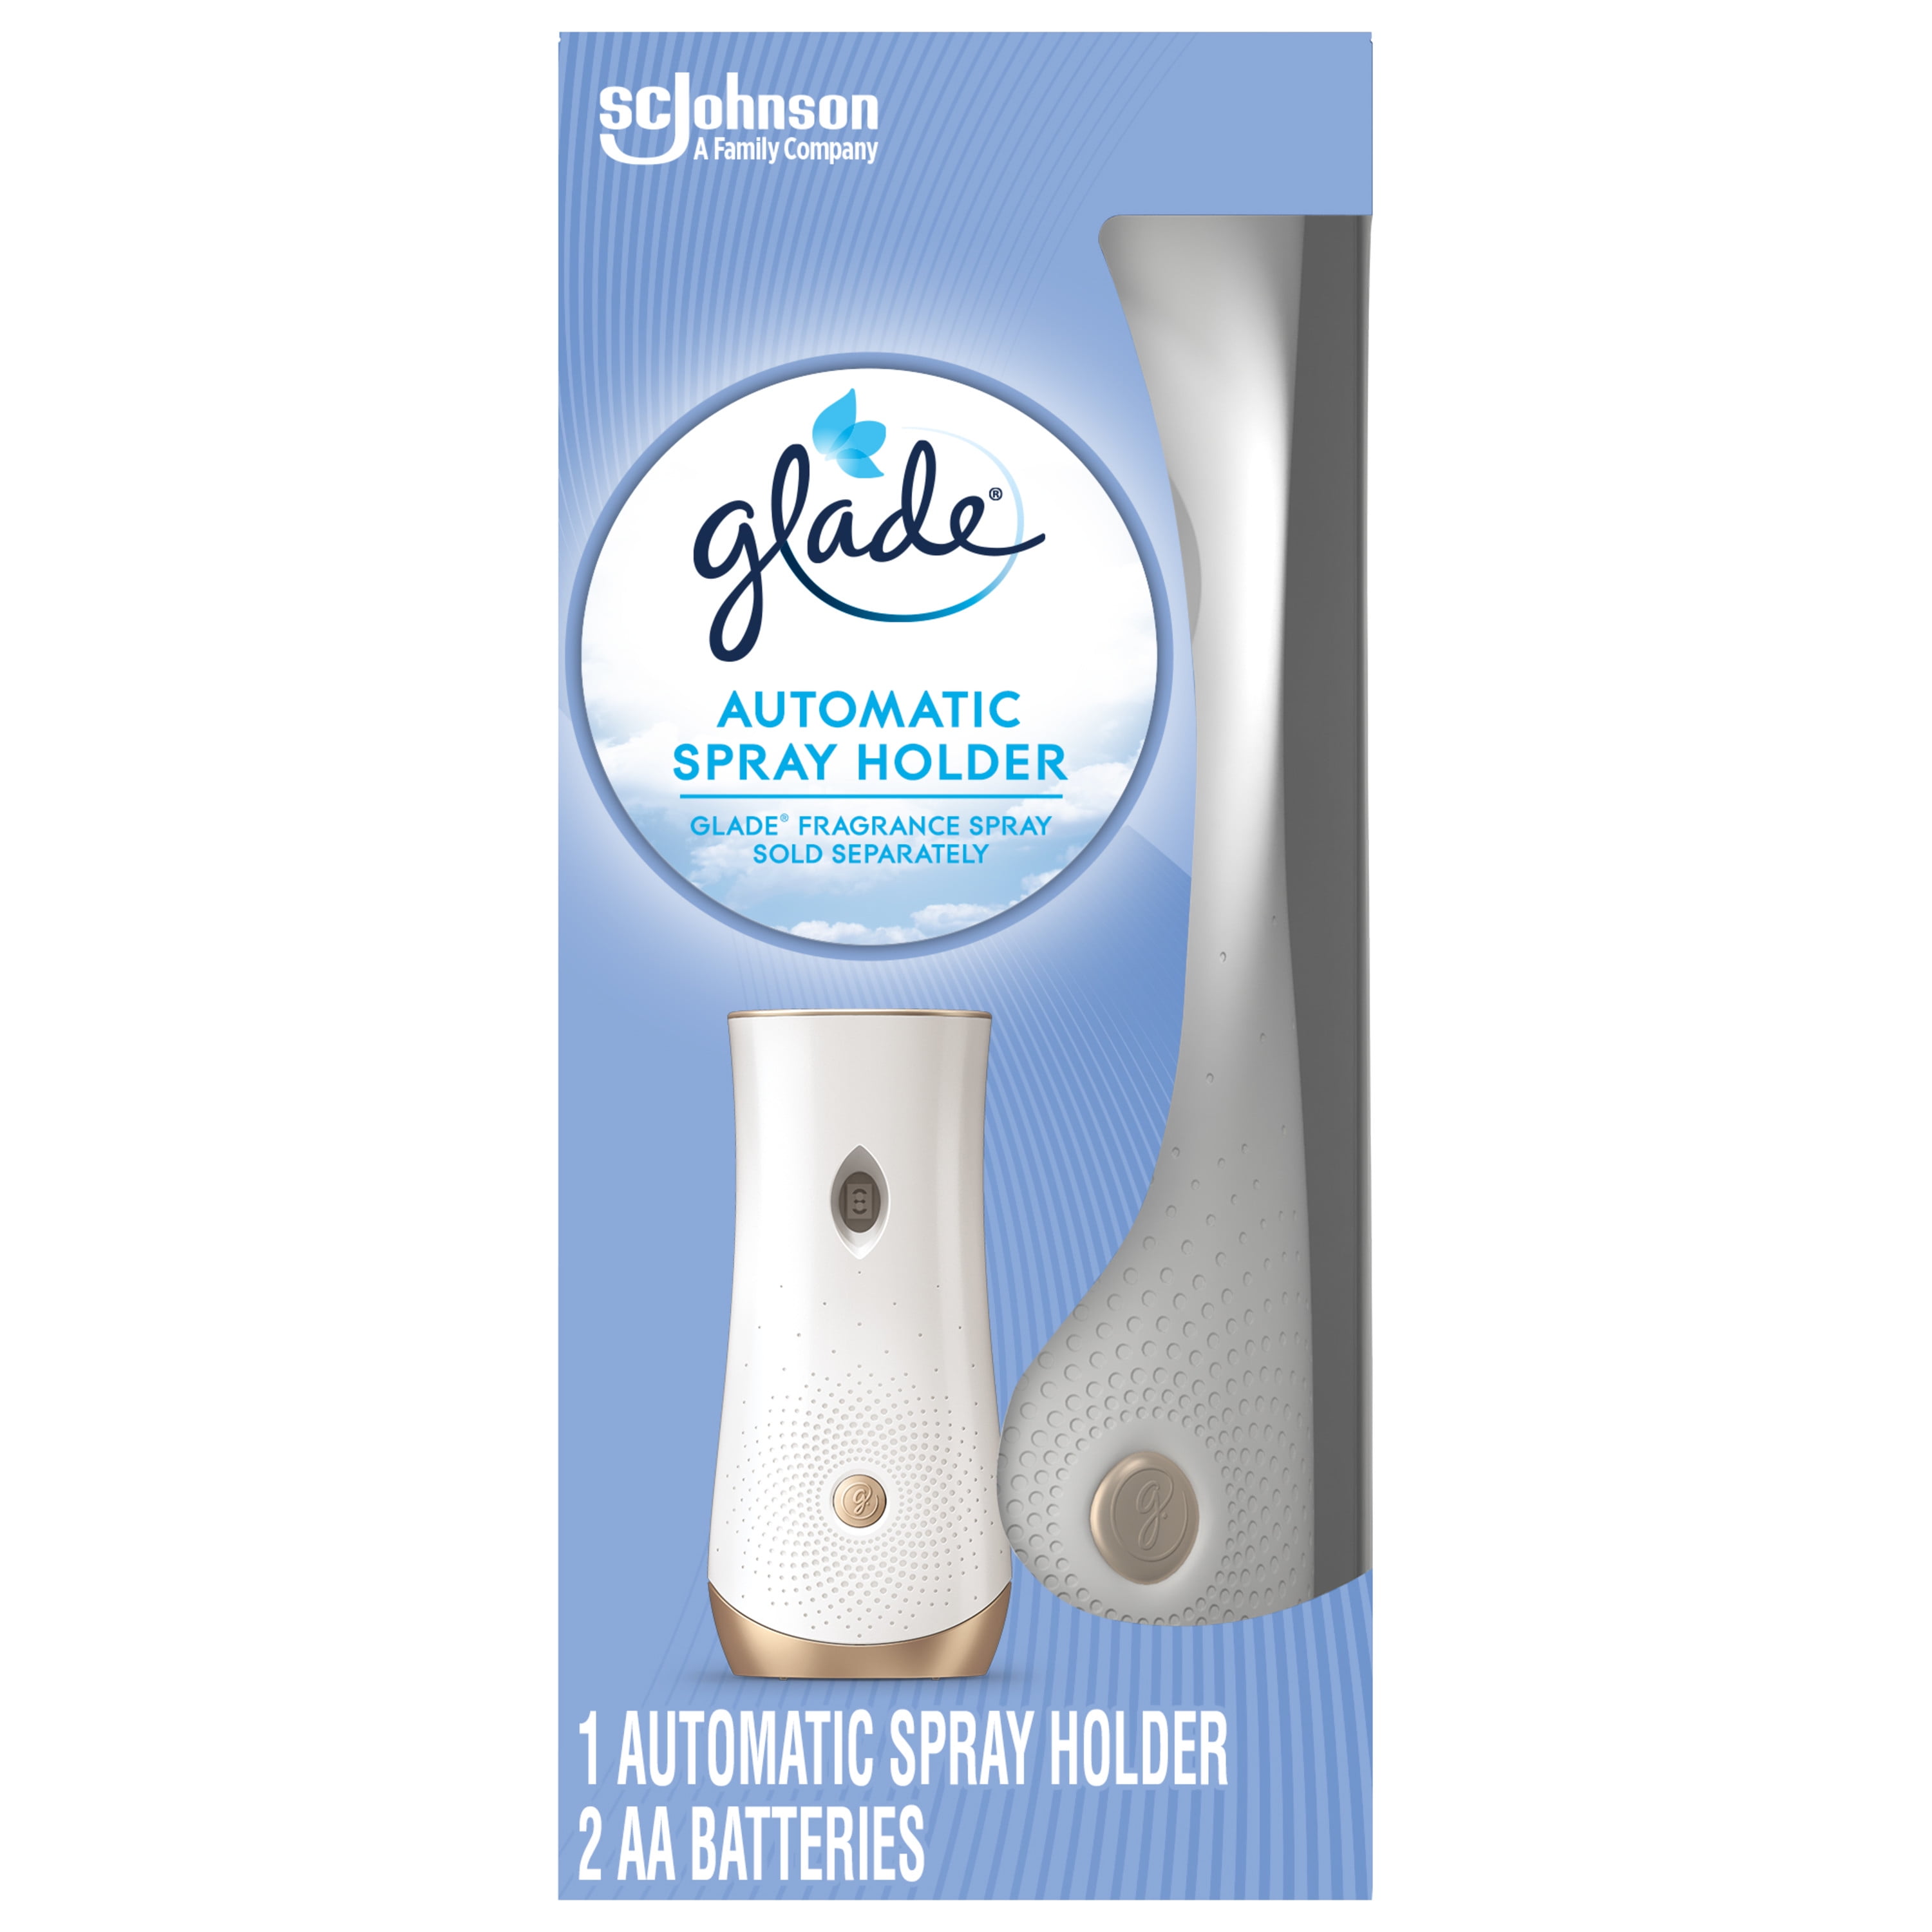 Glade Battery Operated for Automatic Spray Holder - 10.2 oz